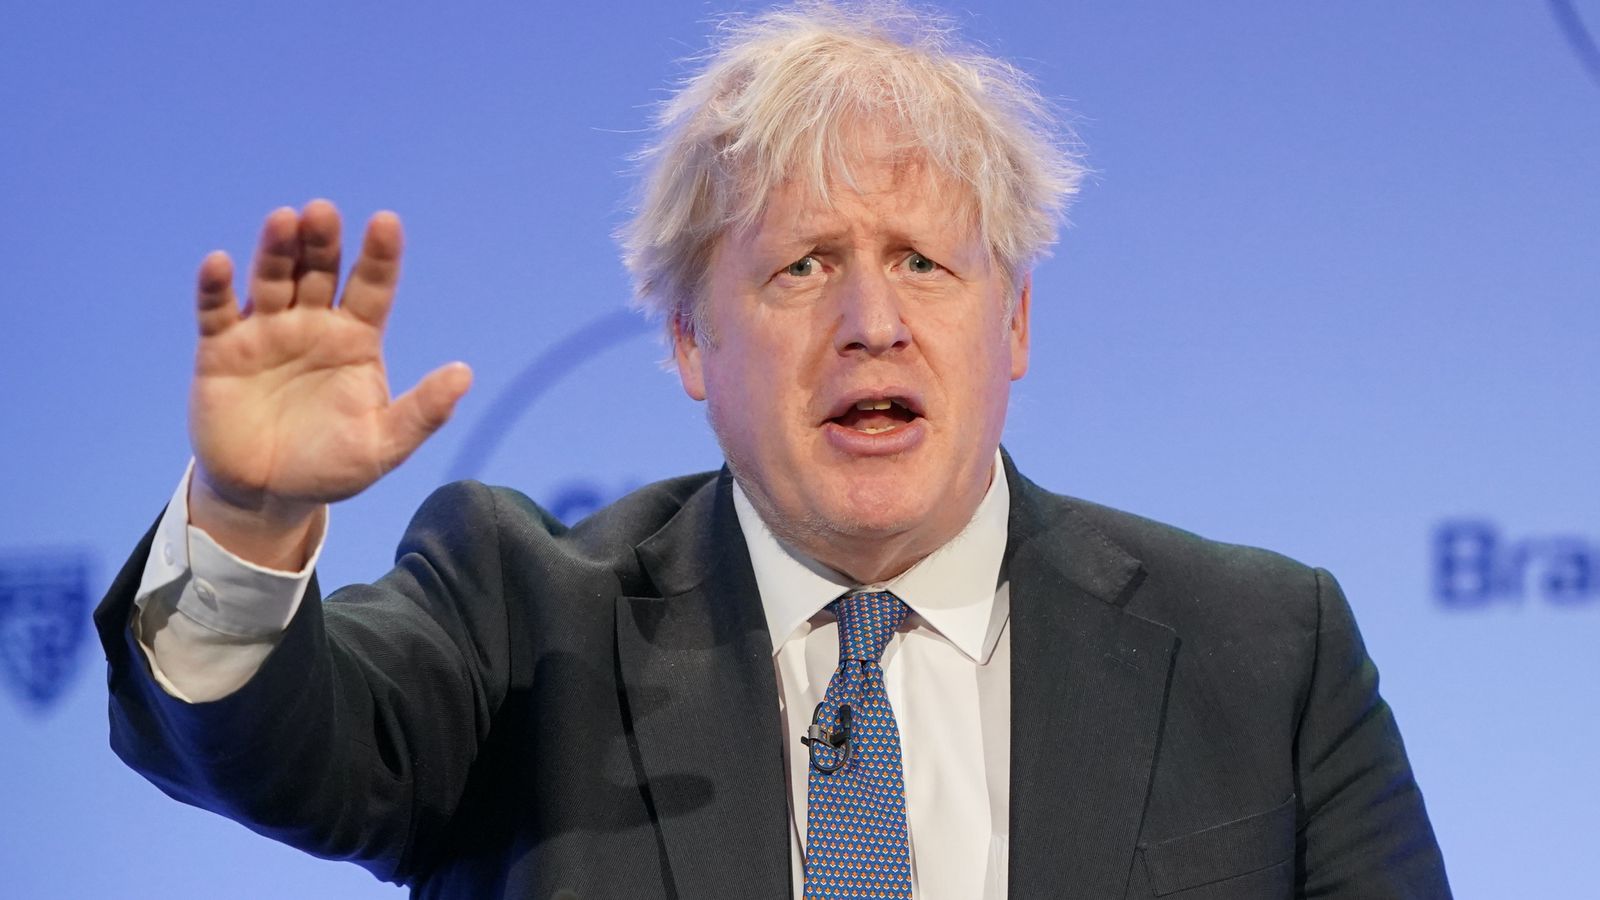 Cabinet Office in court over giving Boris Johnson's WhatsApps and diaries to COVID inquiry